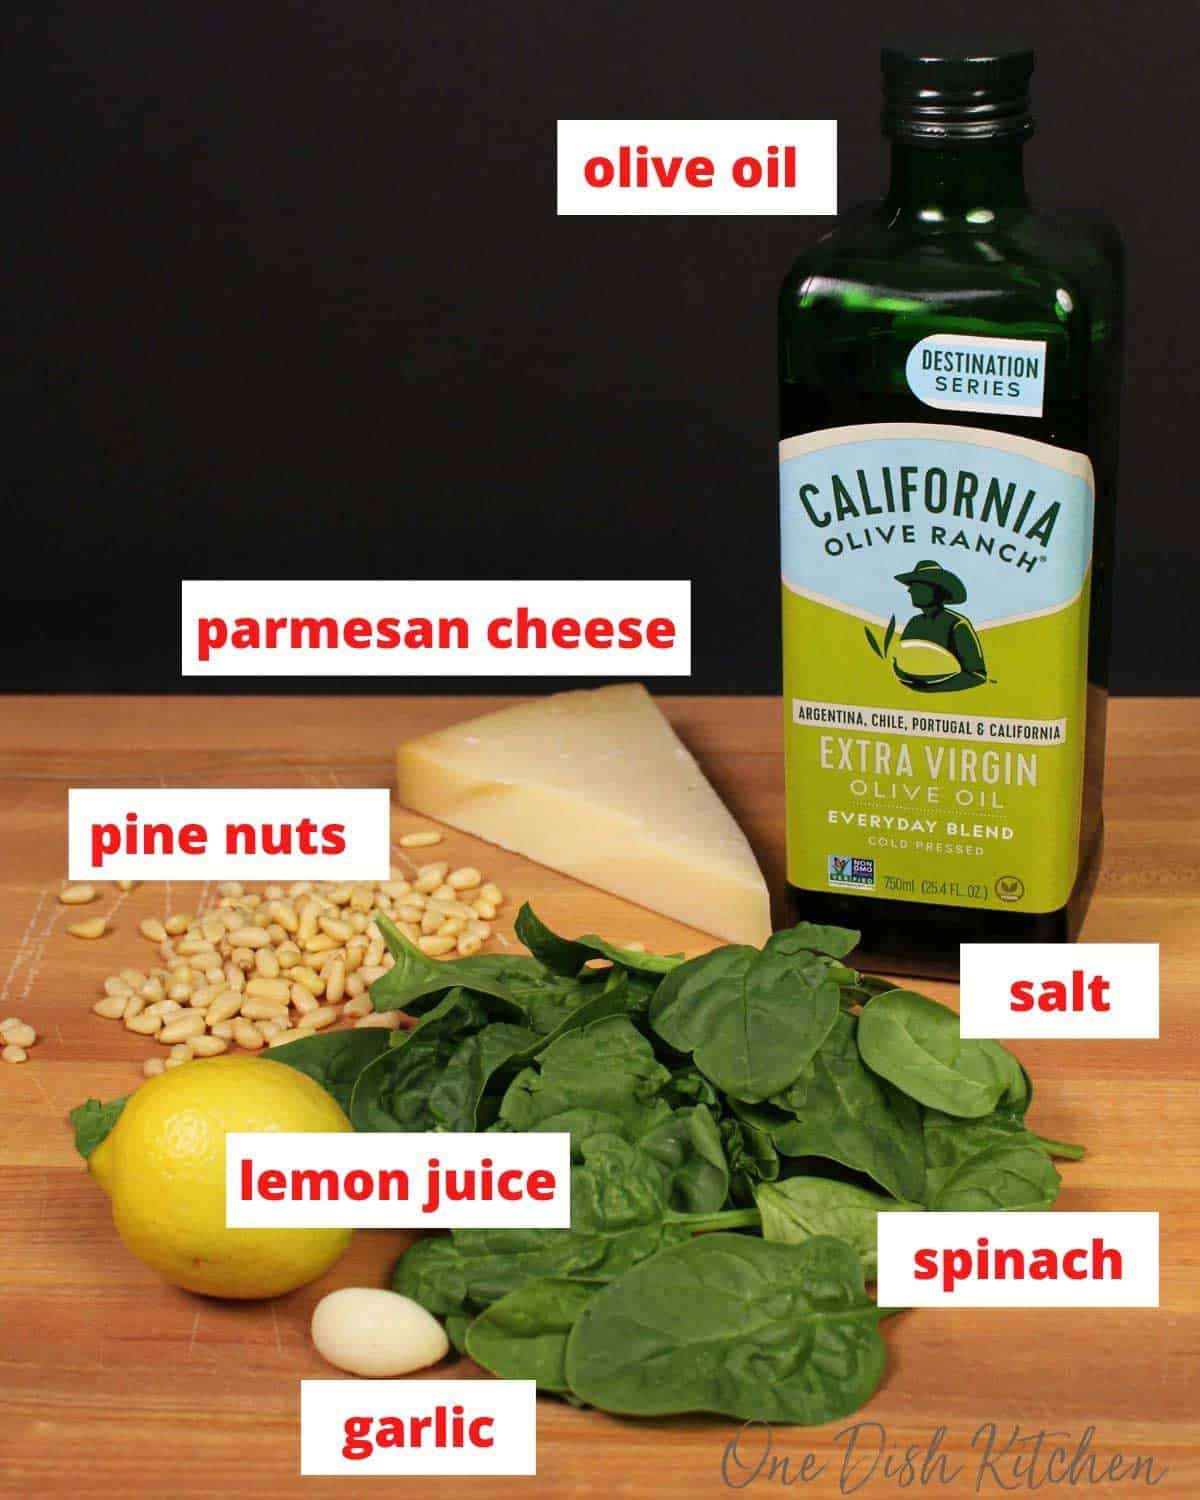 pine nuts, olive oil, lemons, cheese and spinach on a cutting board.